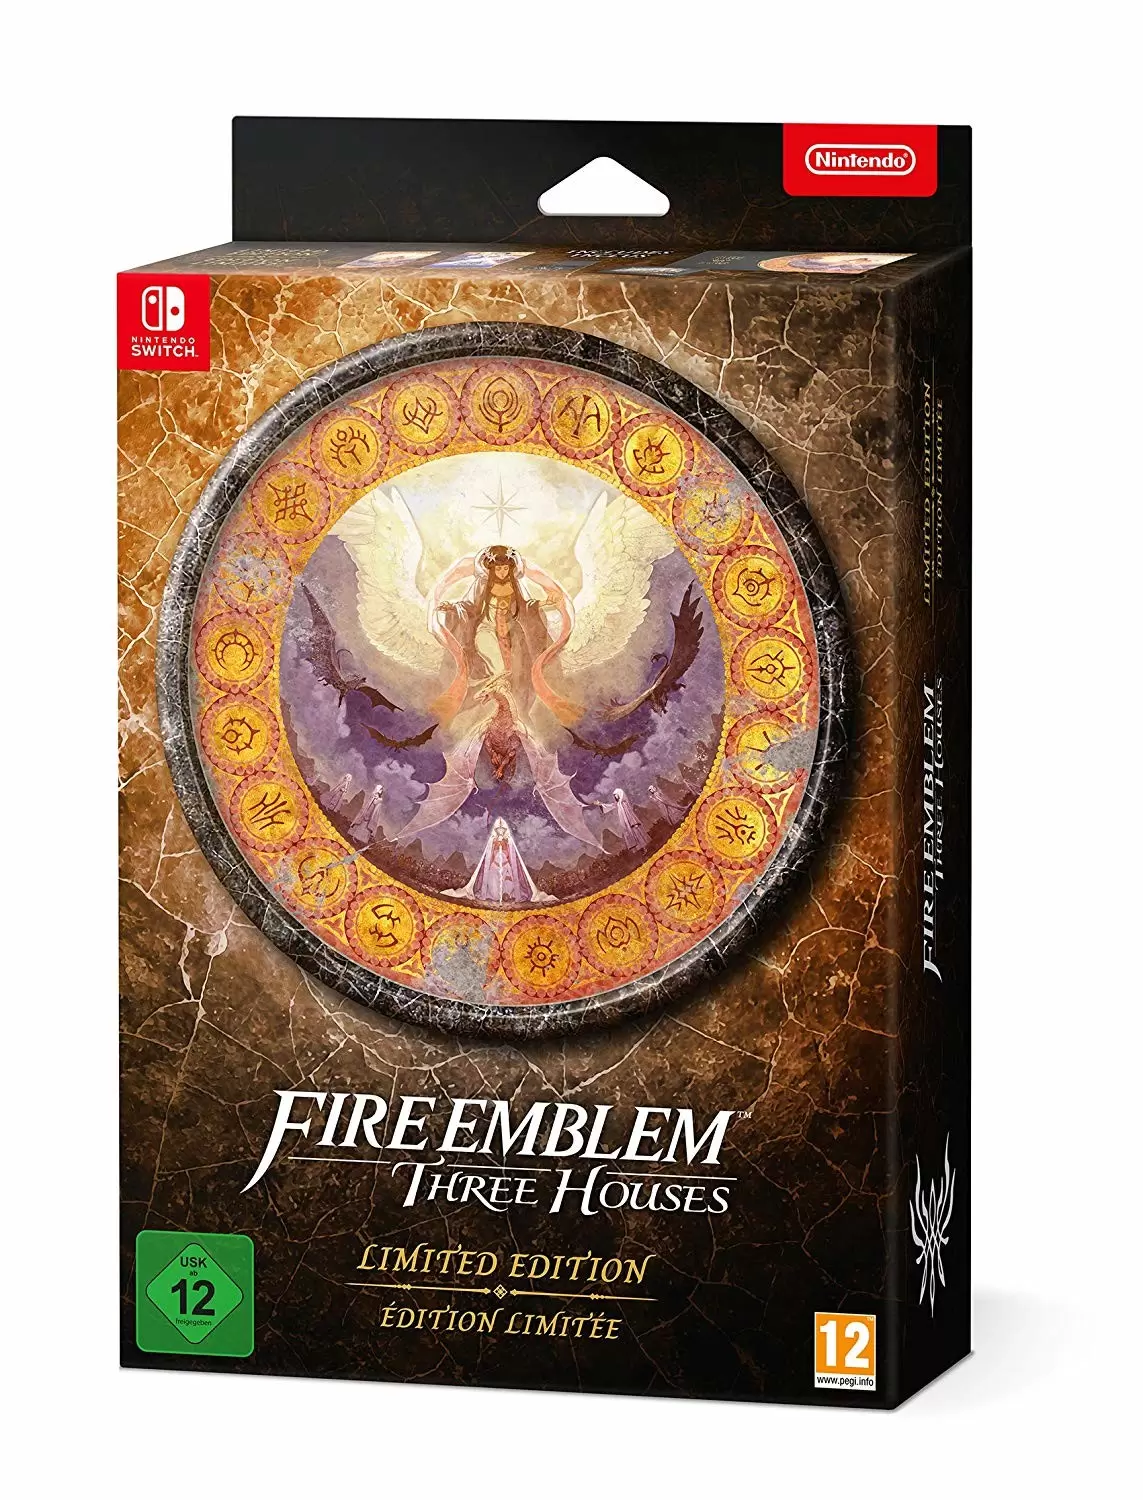 Jeux Nintendo Switch - Fire Emblem Three Houses Limited Edition